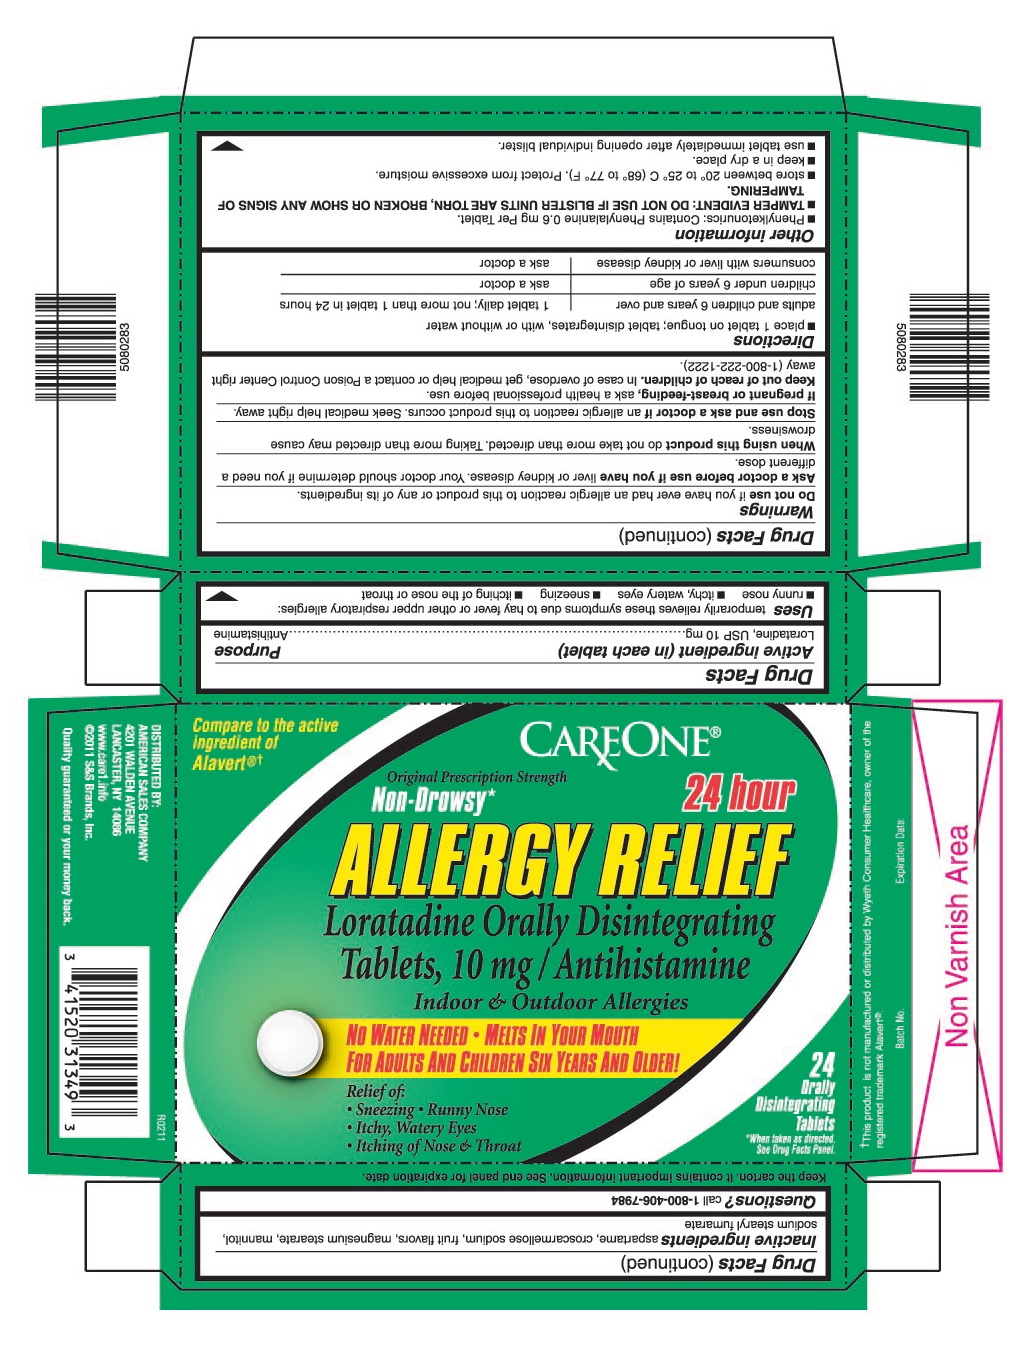 This is the 24 count blister carton label for Careone Loratadine ODT, 10 mg.